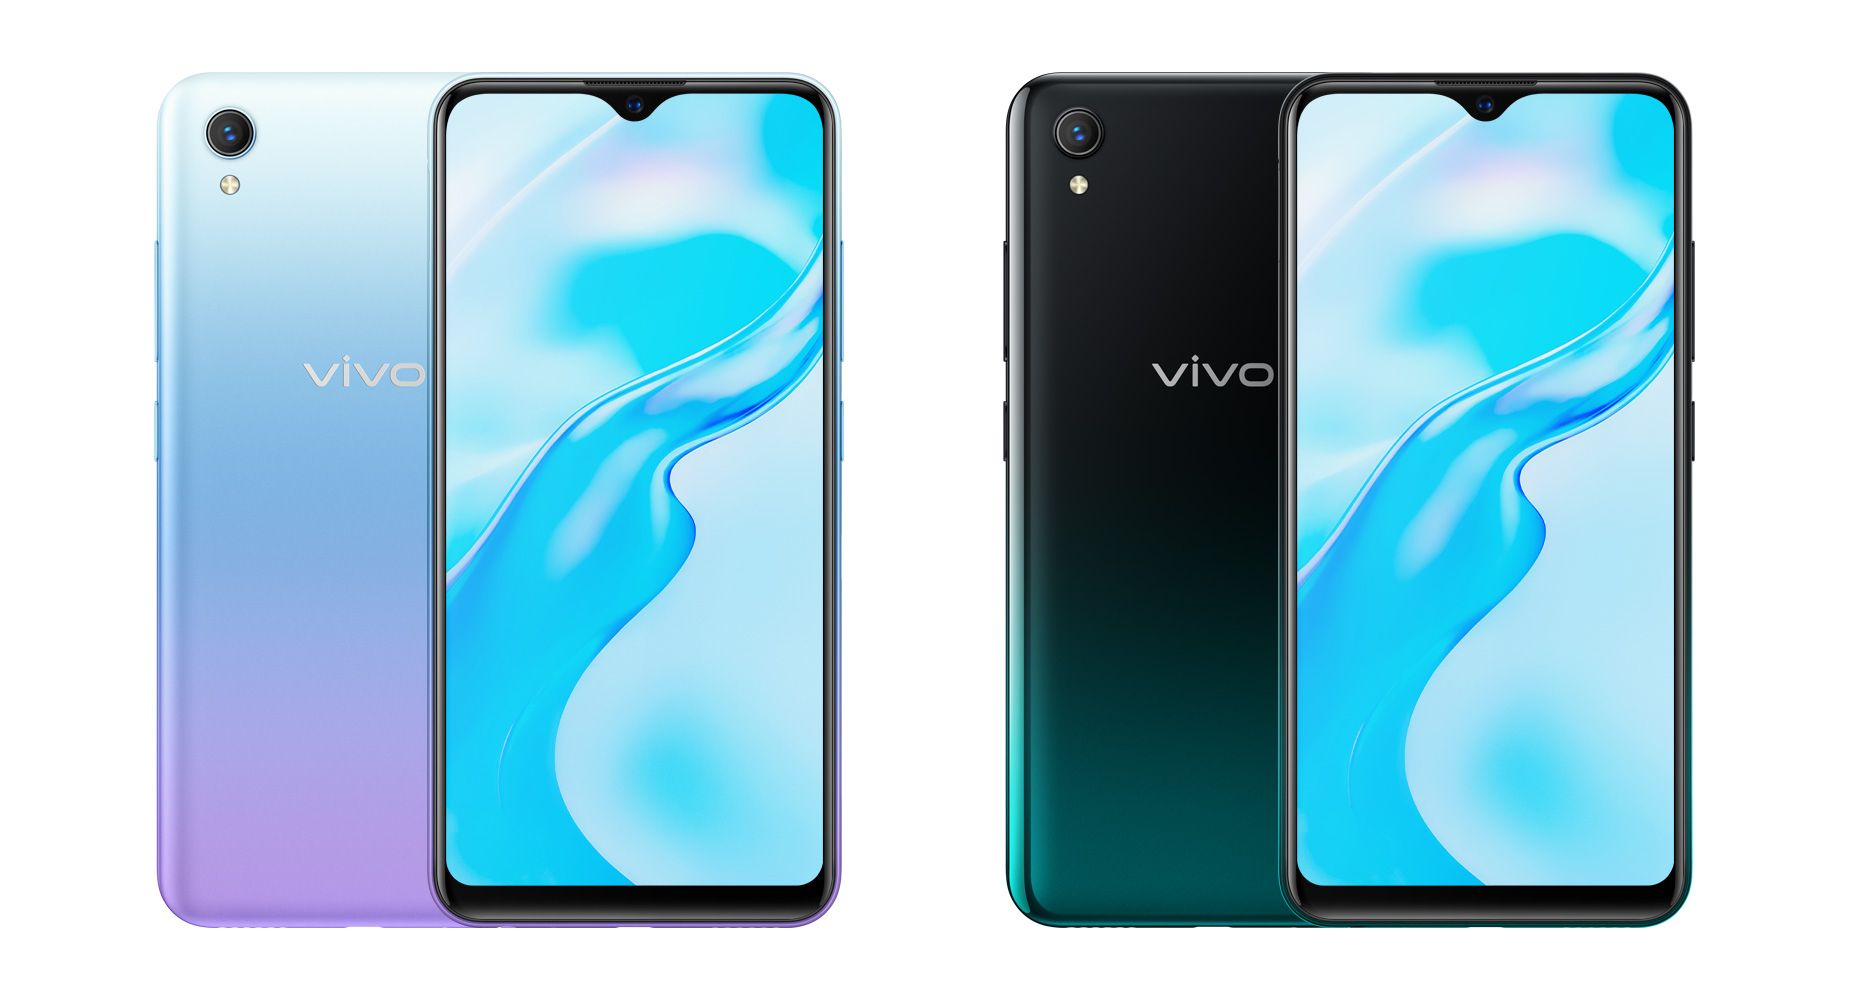 Vivo Y1s with 6.22-inch display, Helio P35 and 4,030mAh battery ...